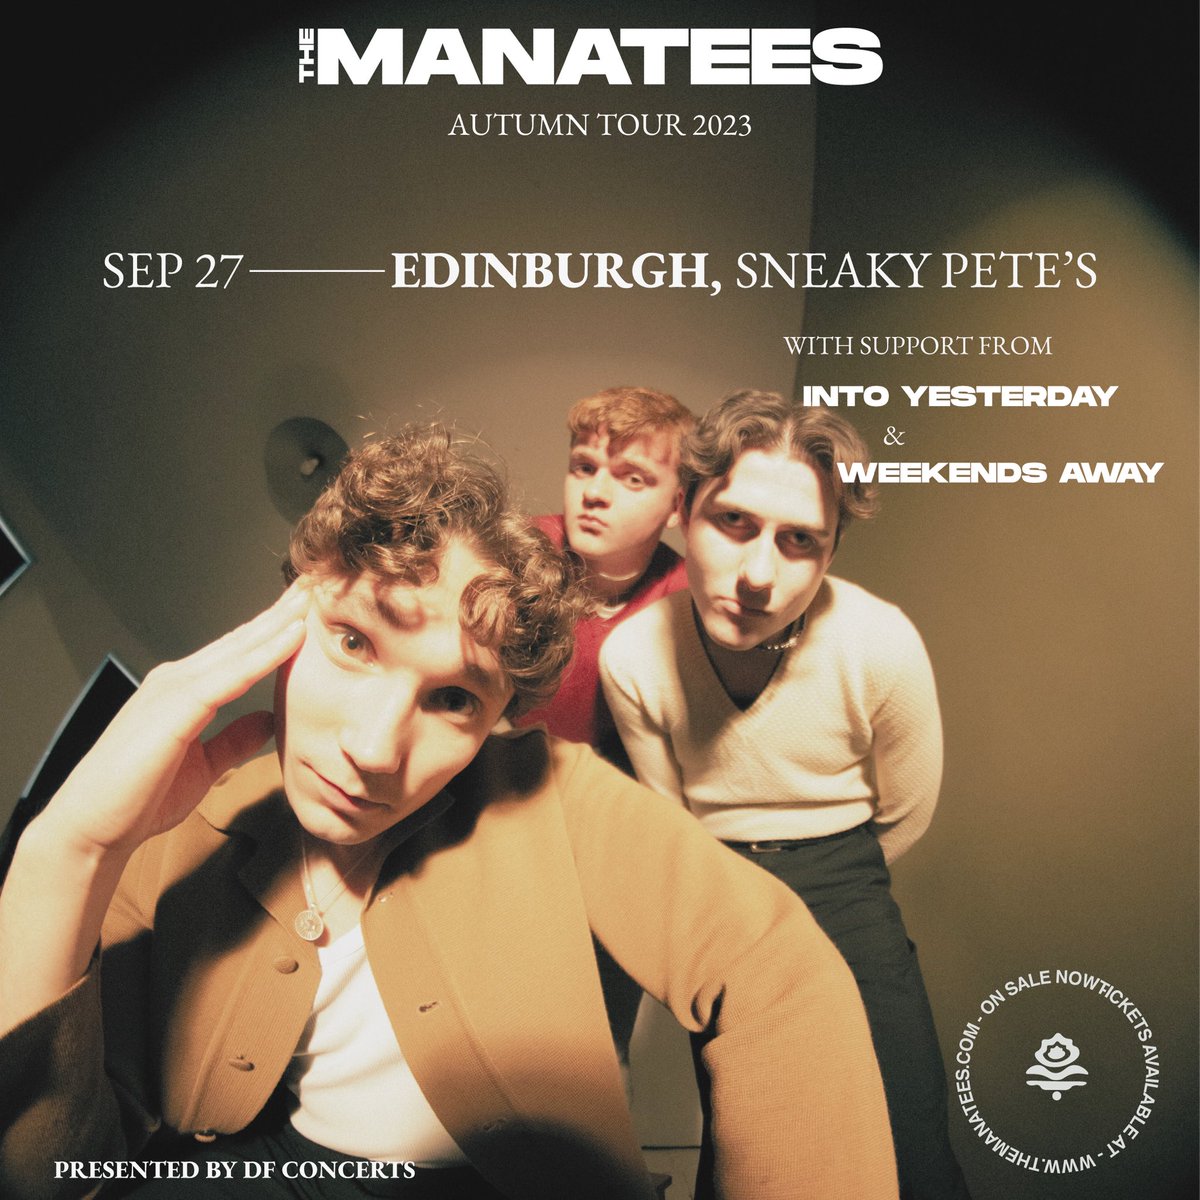 EDINBURGH 🗣️ Just a few weeks now until our next show on Wed 27th September @sneakypetesclub supporting @Themanateesband with Weekends Away 🤝 Bring your pals. Bring your other pals. Maybe don’t bring your dog. Tickets can be found in the link in our bio 🕺